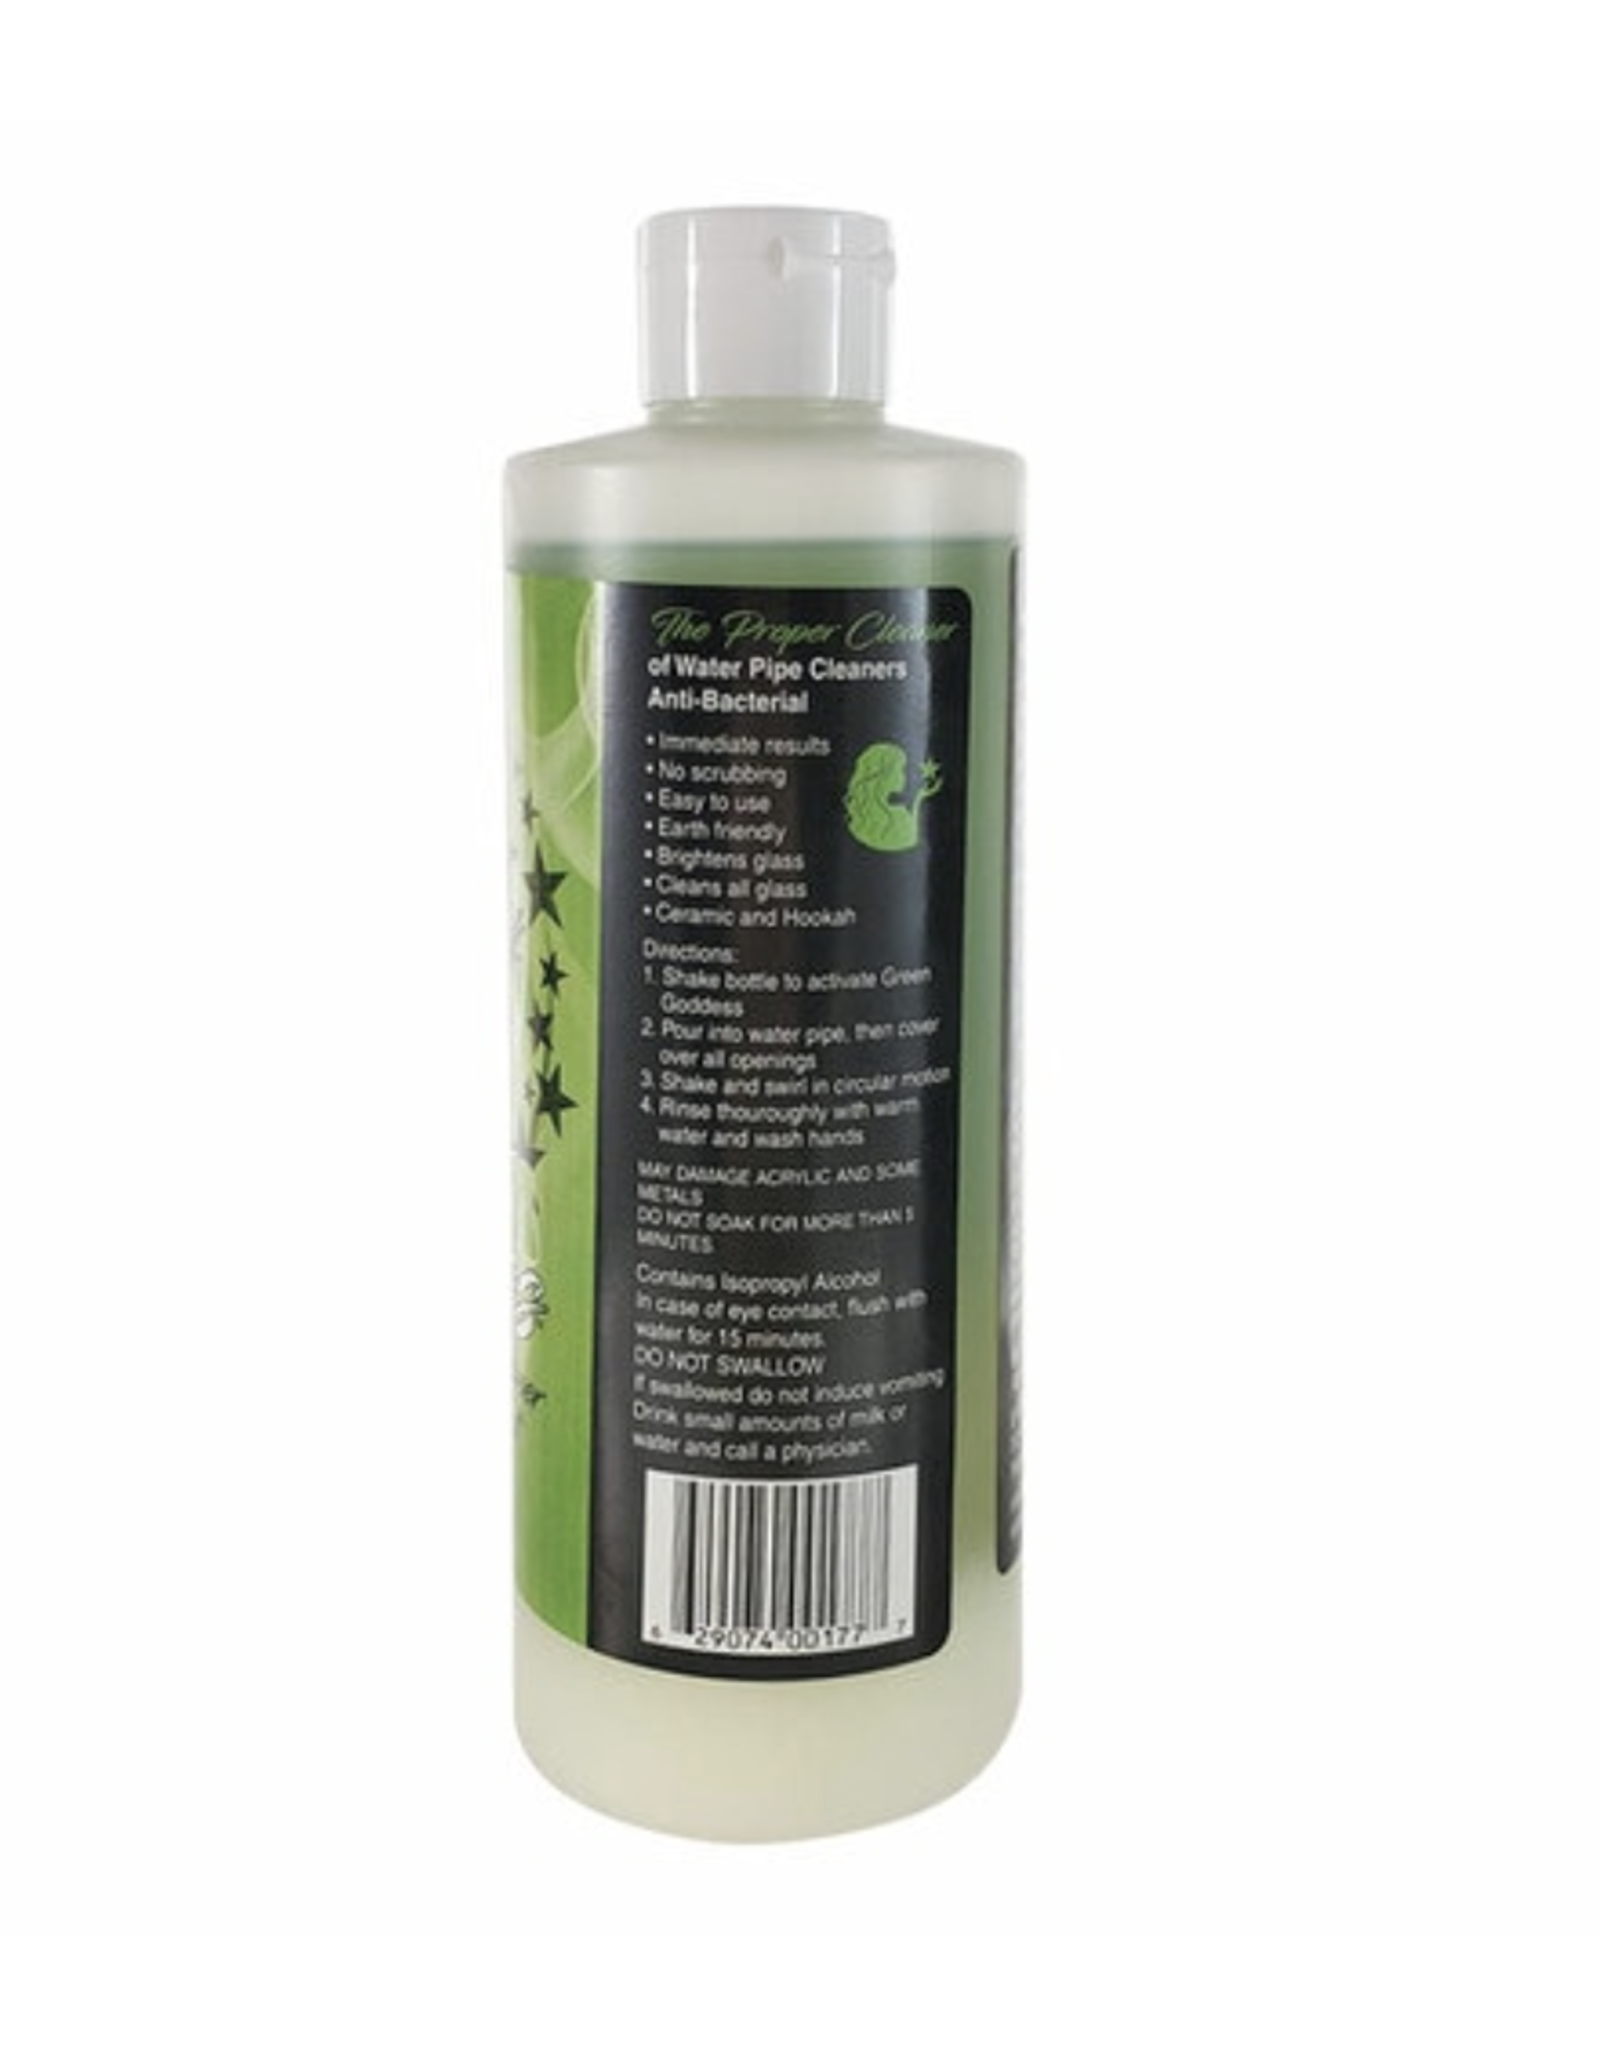 Green Goddess 16oz Cleaner *Not Available for Shipping*